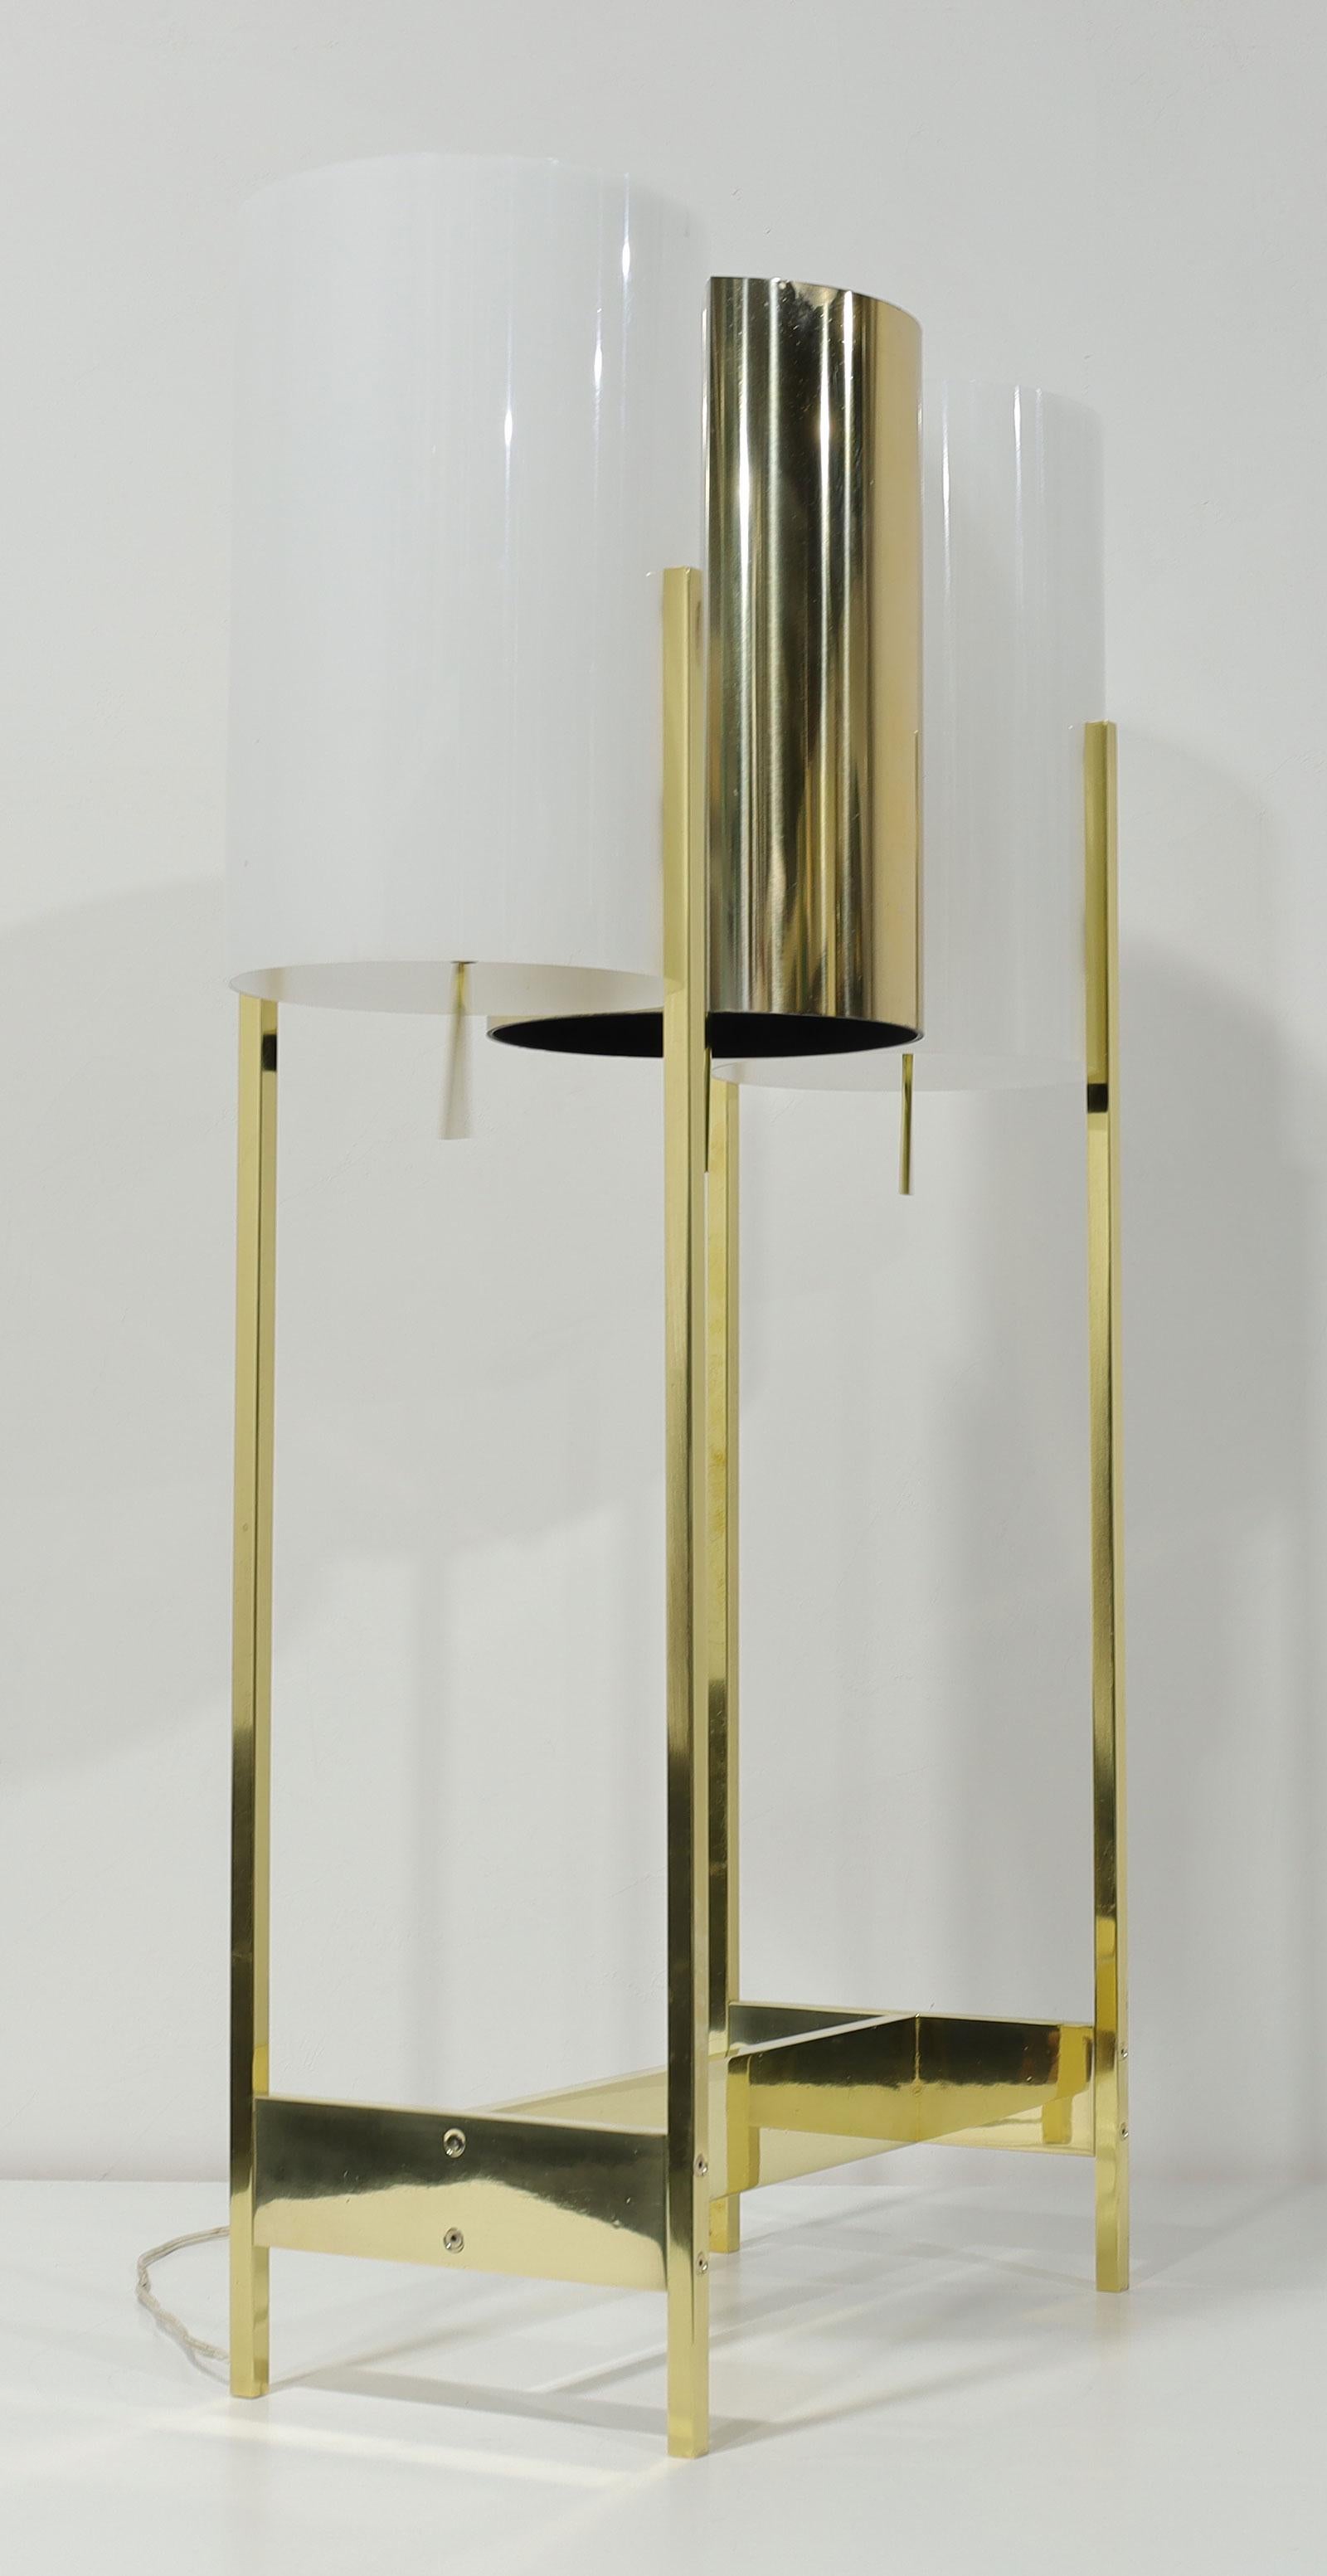 Large Paul Mayen for Habitat Brass and Lucite Table Lamps, 1960s For Sale 1